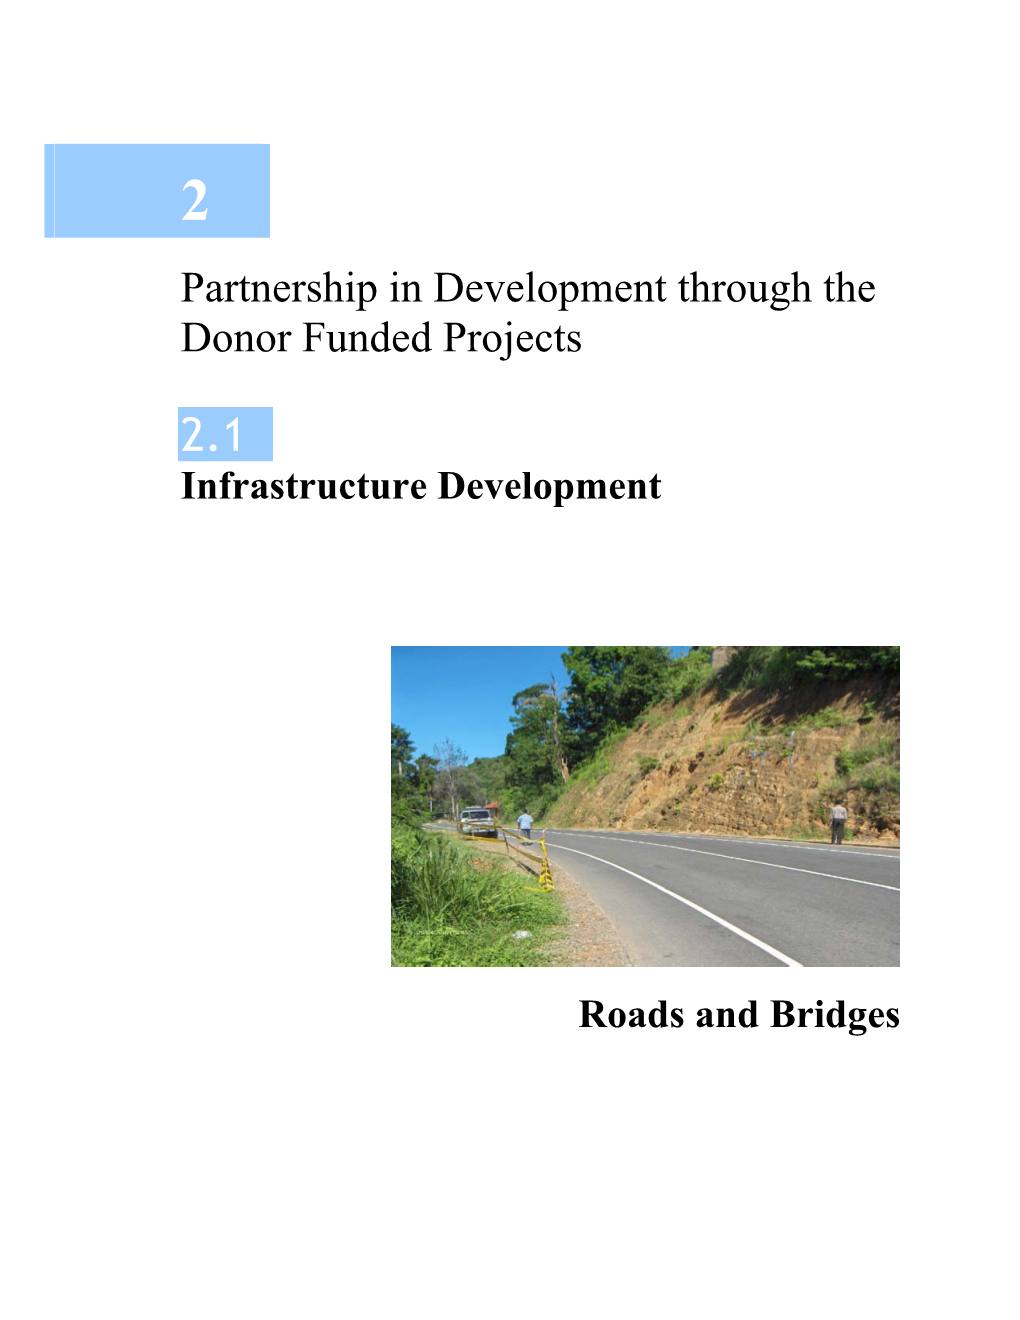 Partnership in Development Through the Donor Funded Projects